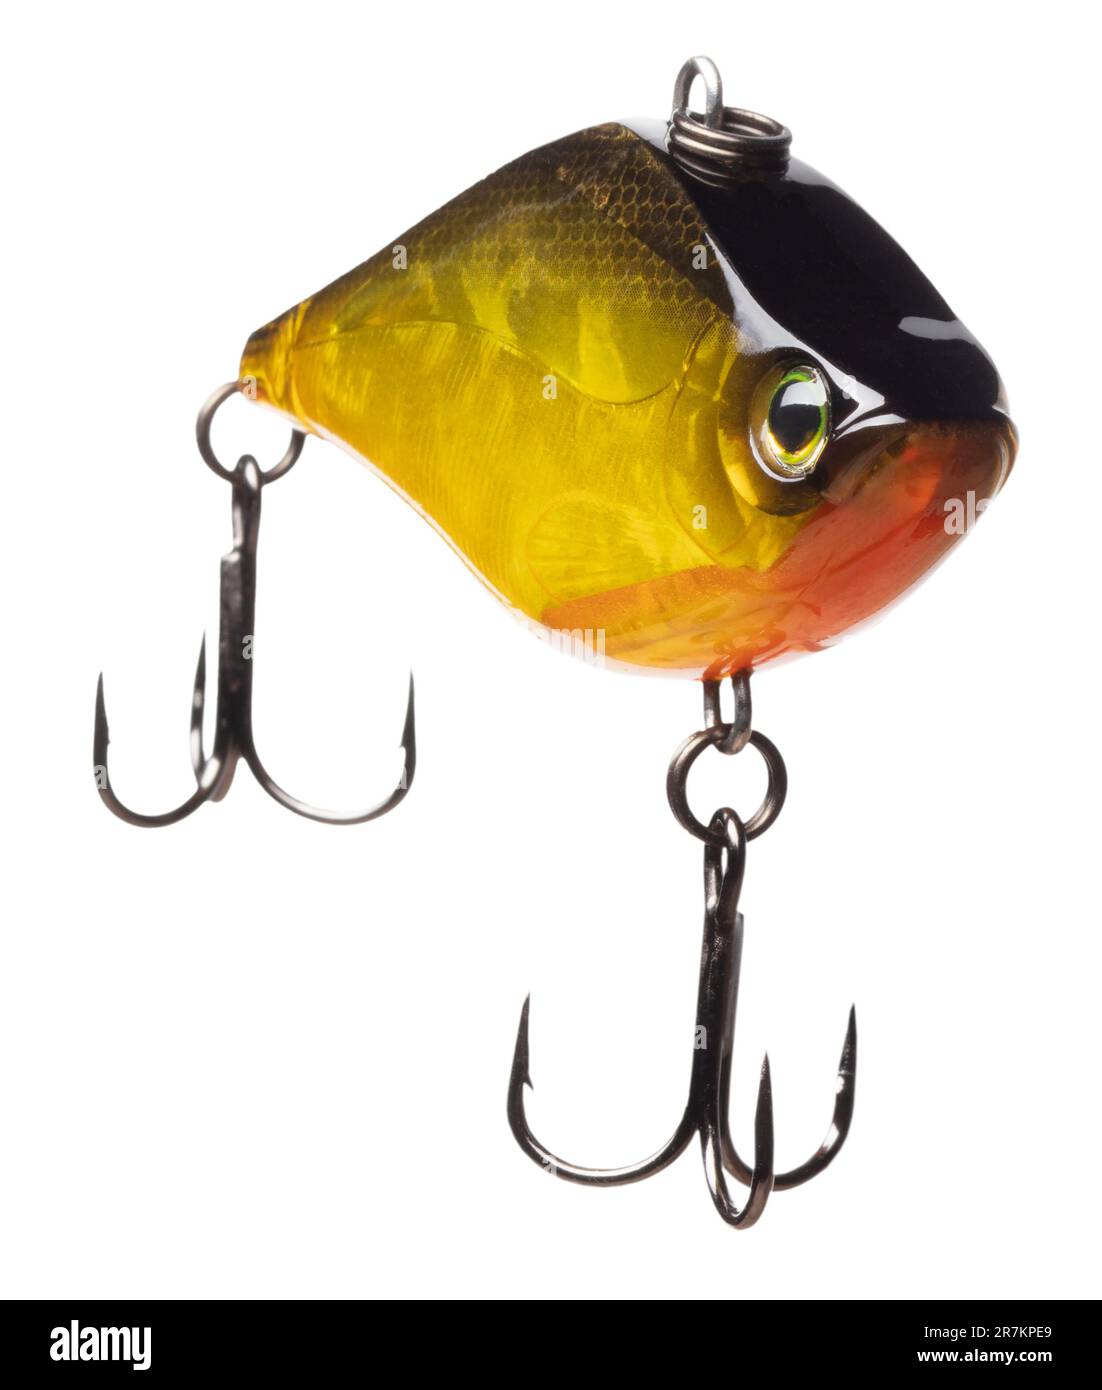 Yellow and orange fishing lure that looks like it is coming at the